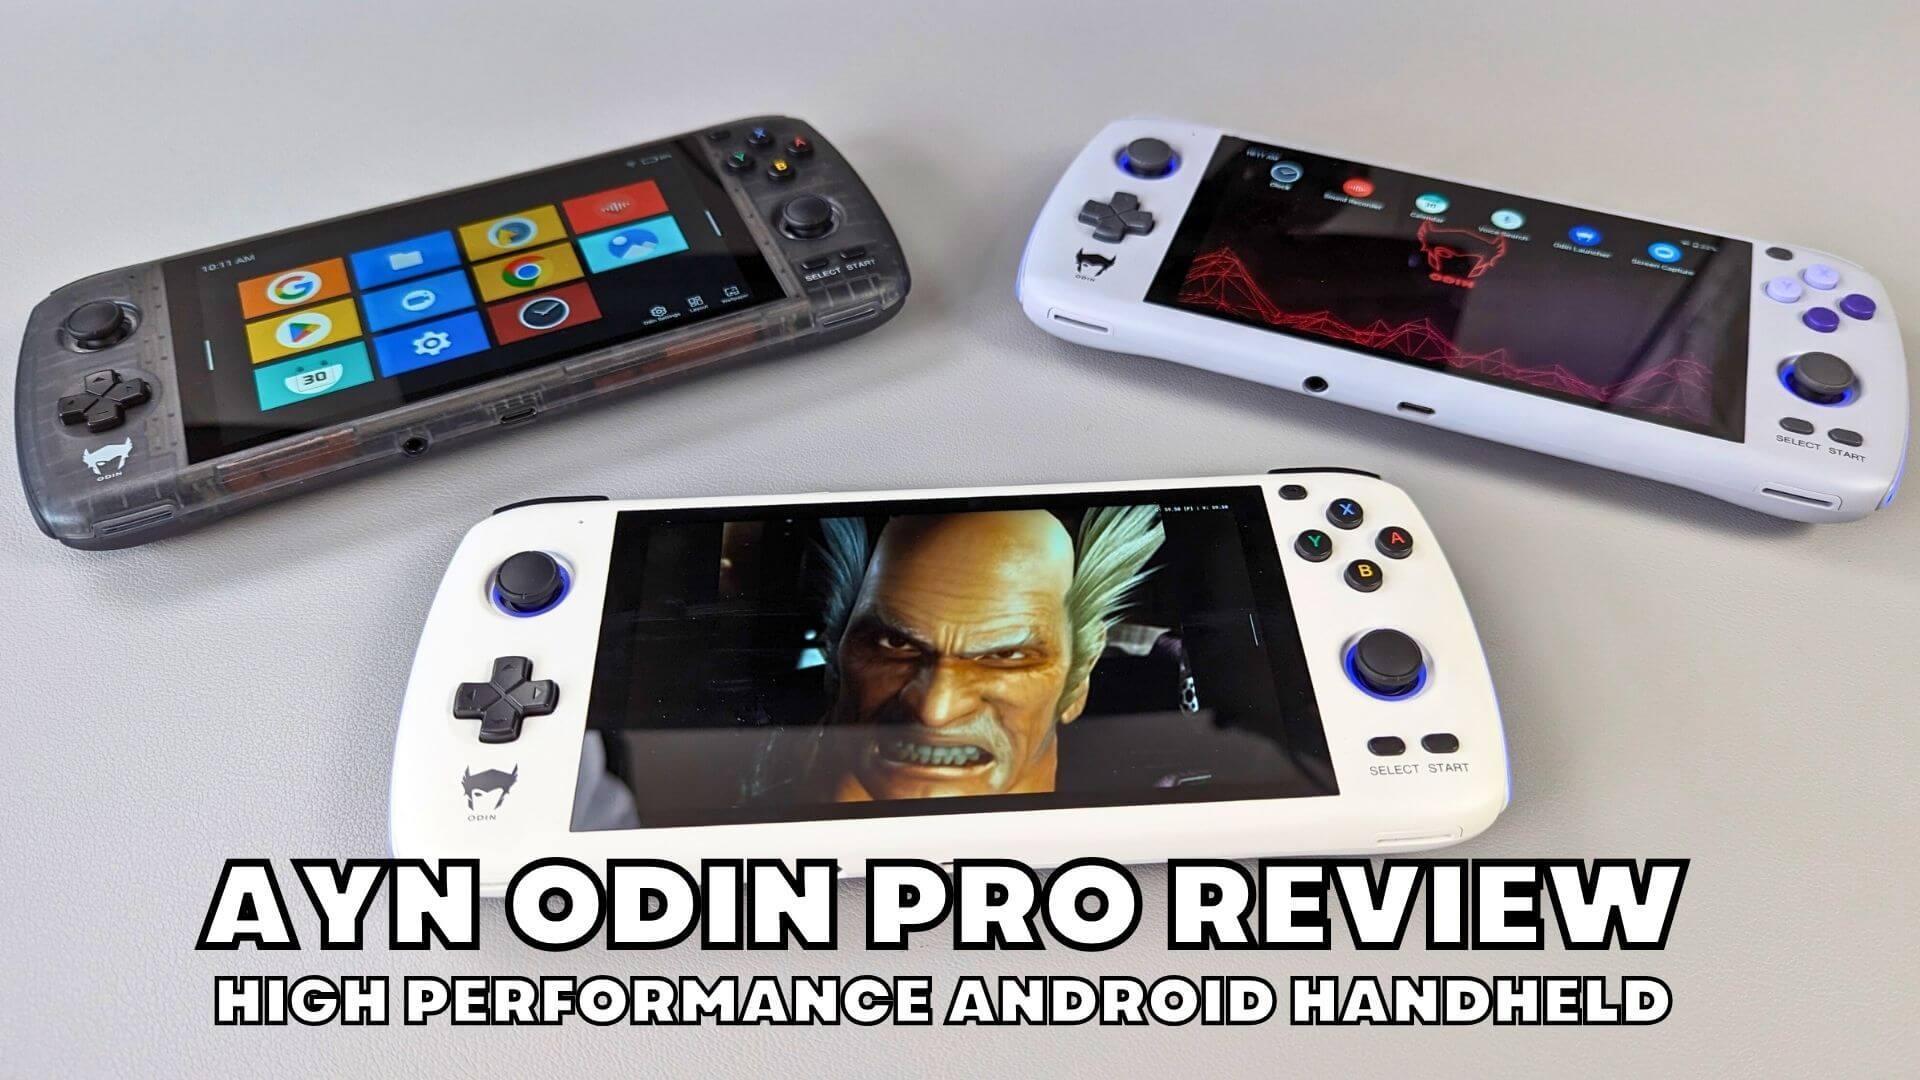 AYN Odin Pro Review – Excellent high performance Android handheld game console